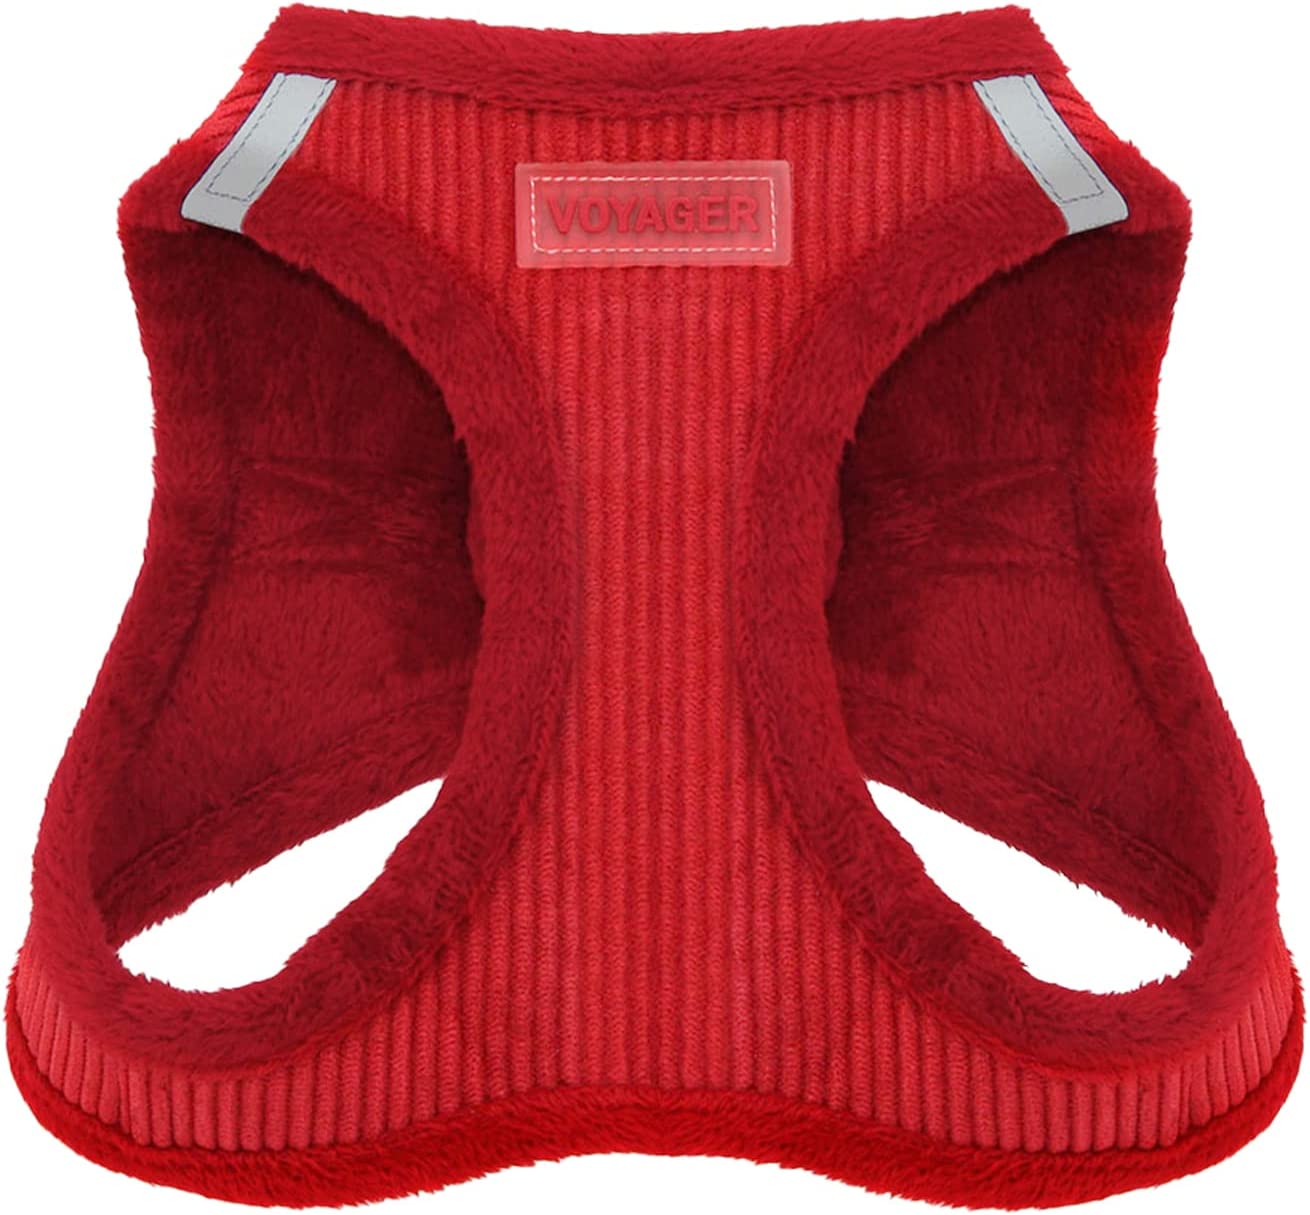 Best Pet Supplies Voyager Step In Plush Dog Harness (Various Colors, Small/Medium Dog) $5.48 + FS w/ Prime or $25+